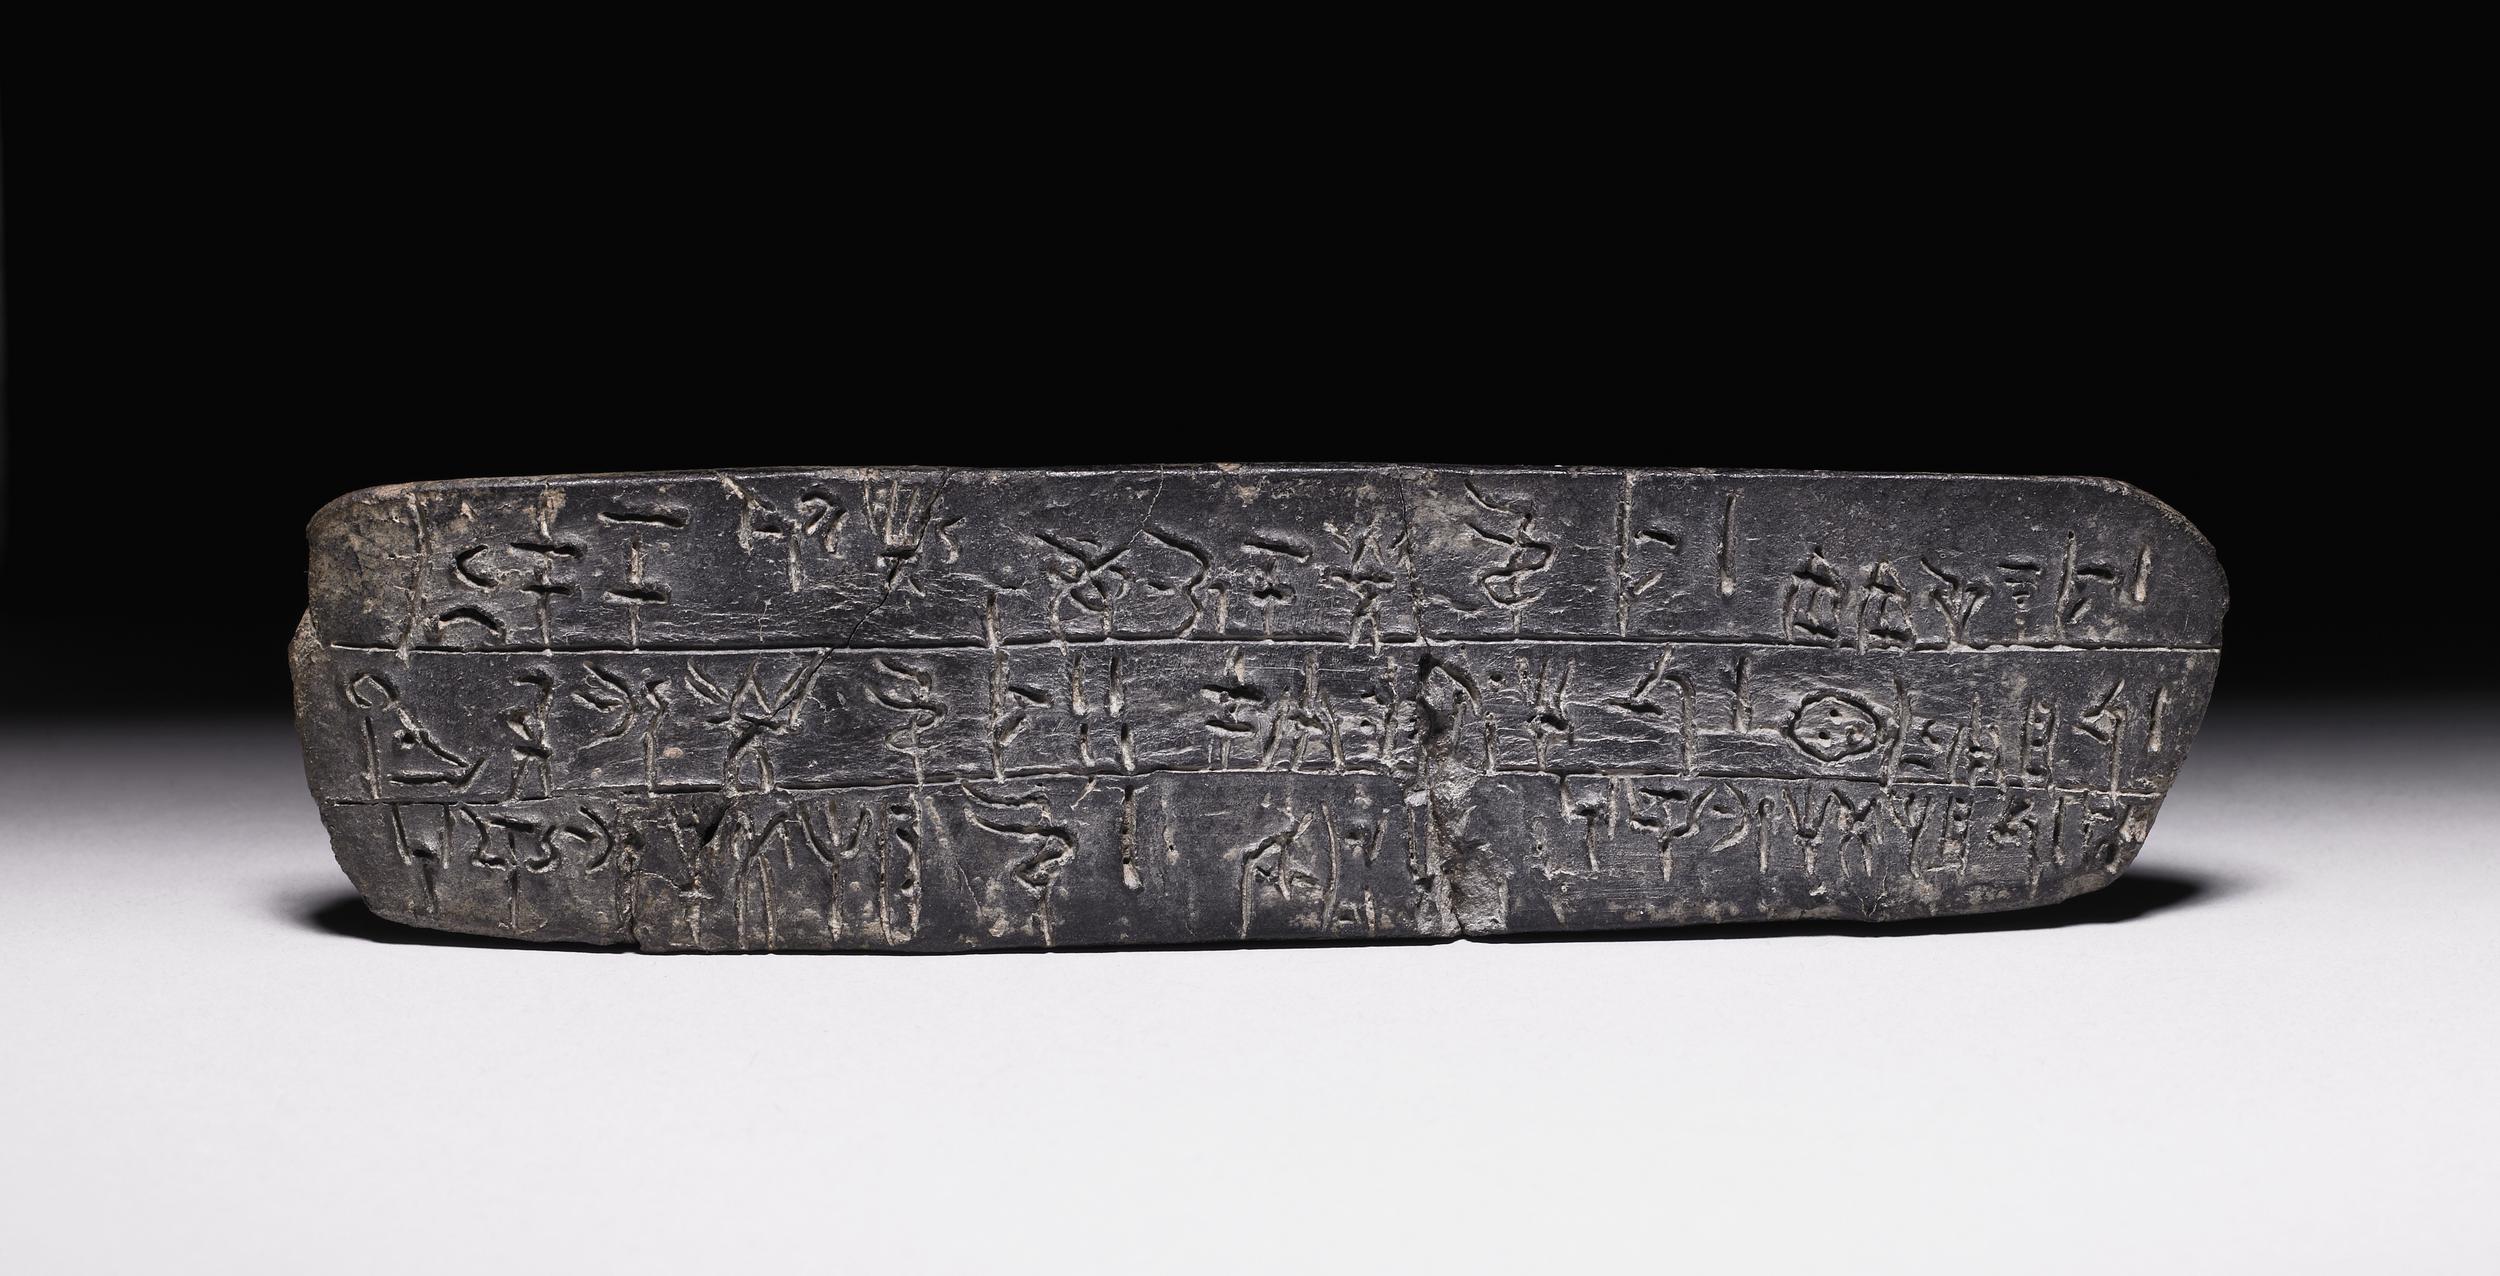 Tablet with Linear B script (describes oil offered to deities and religious officials), c. 1375 B.C.E., Late Minoan IIIA, Knossos, Crete (The British Museum, photo: Trustees of the British Museum, CC BY-NC-SA 4.0))